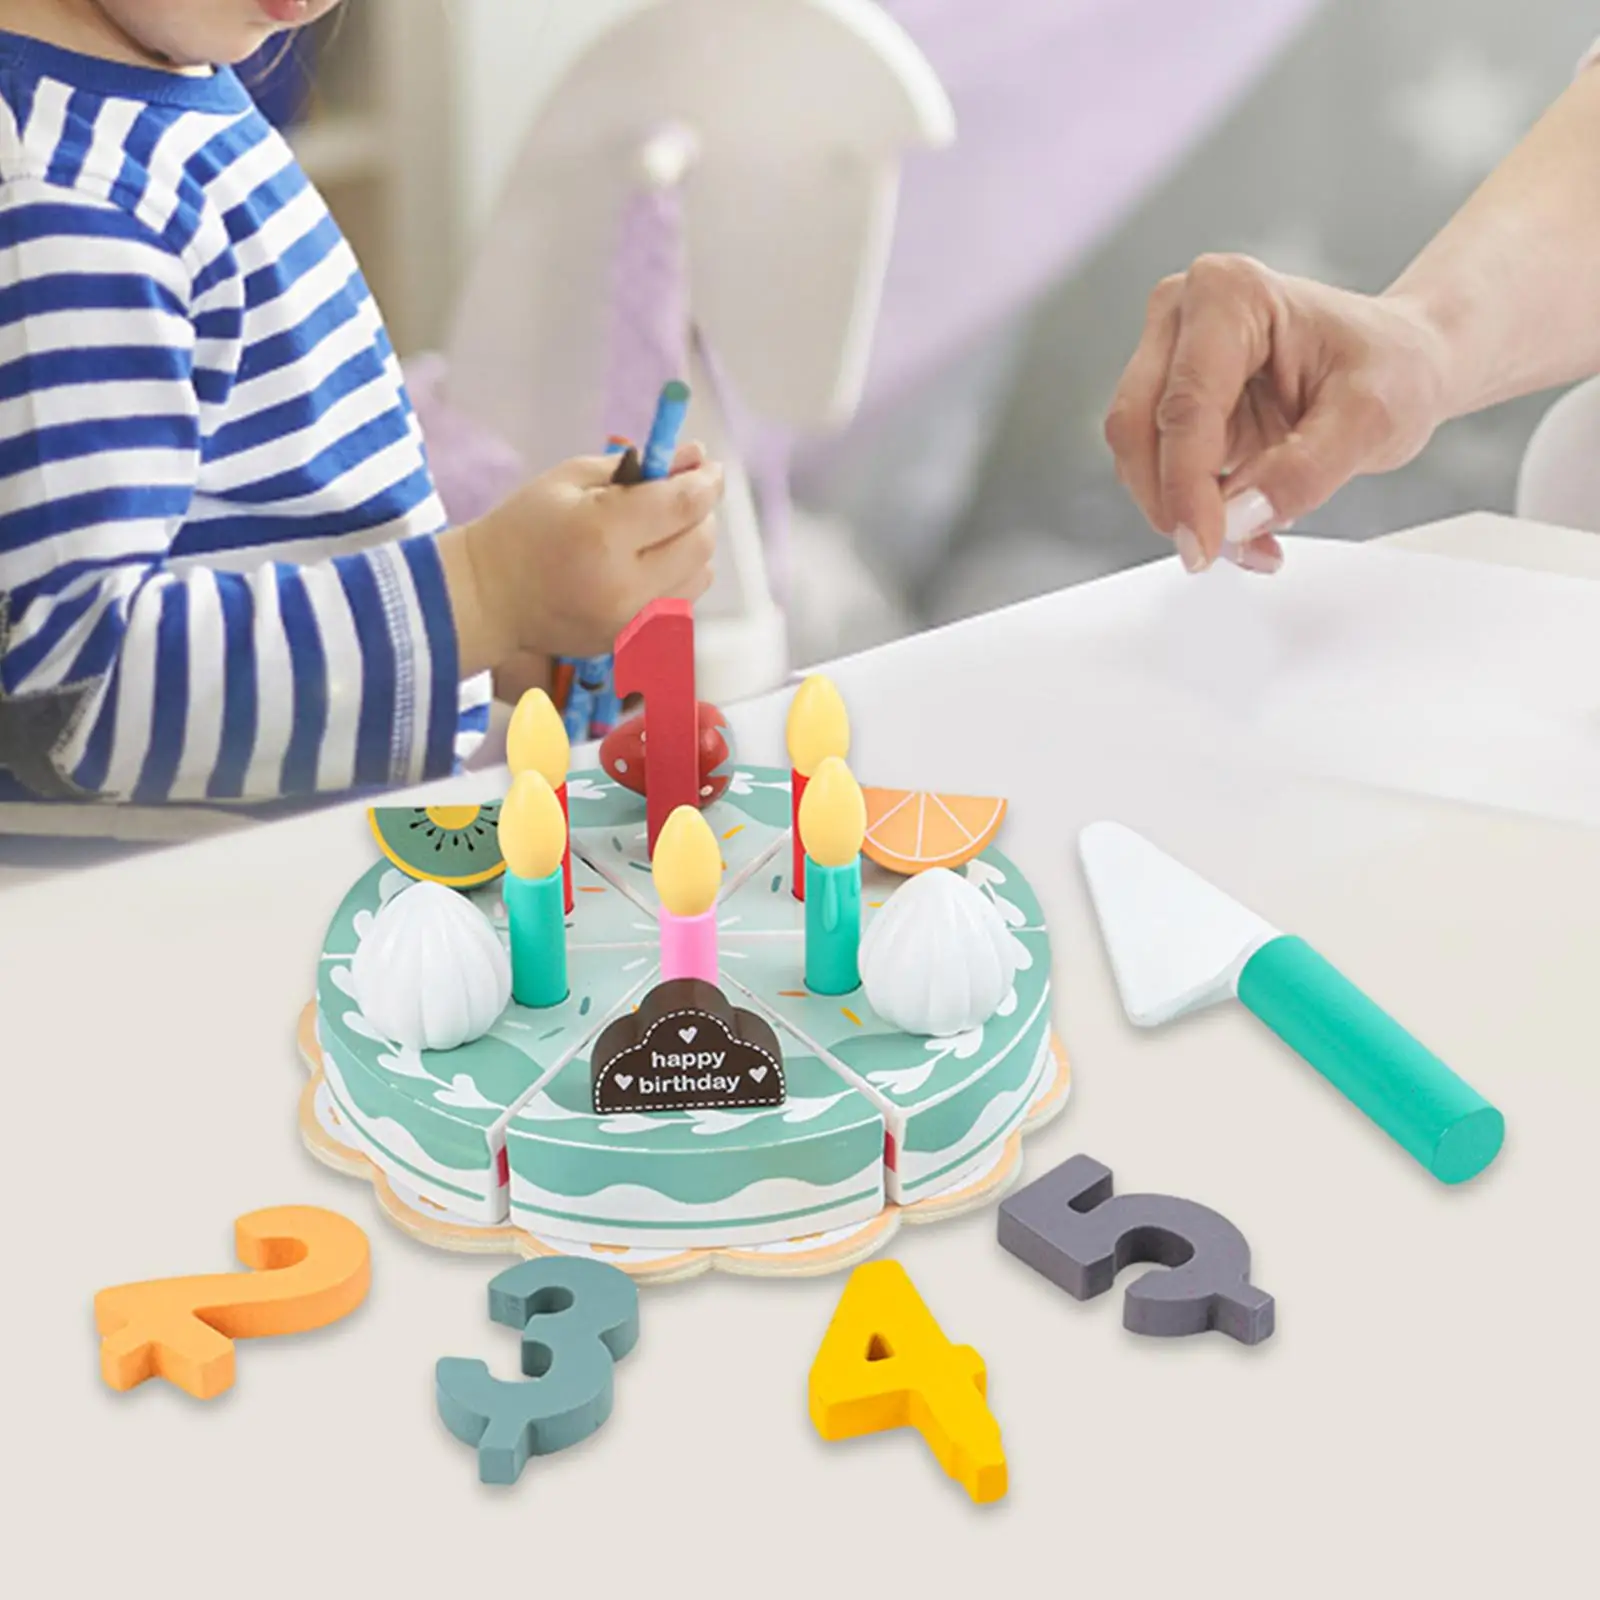 Wooden Cutting Birthday Cake Toys Creative with Candles Fruit Accessories for Kids Toddlers Girls and Boys Preschool Children